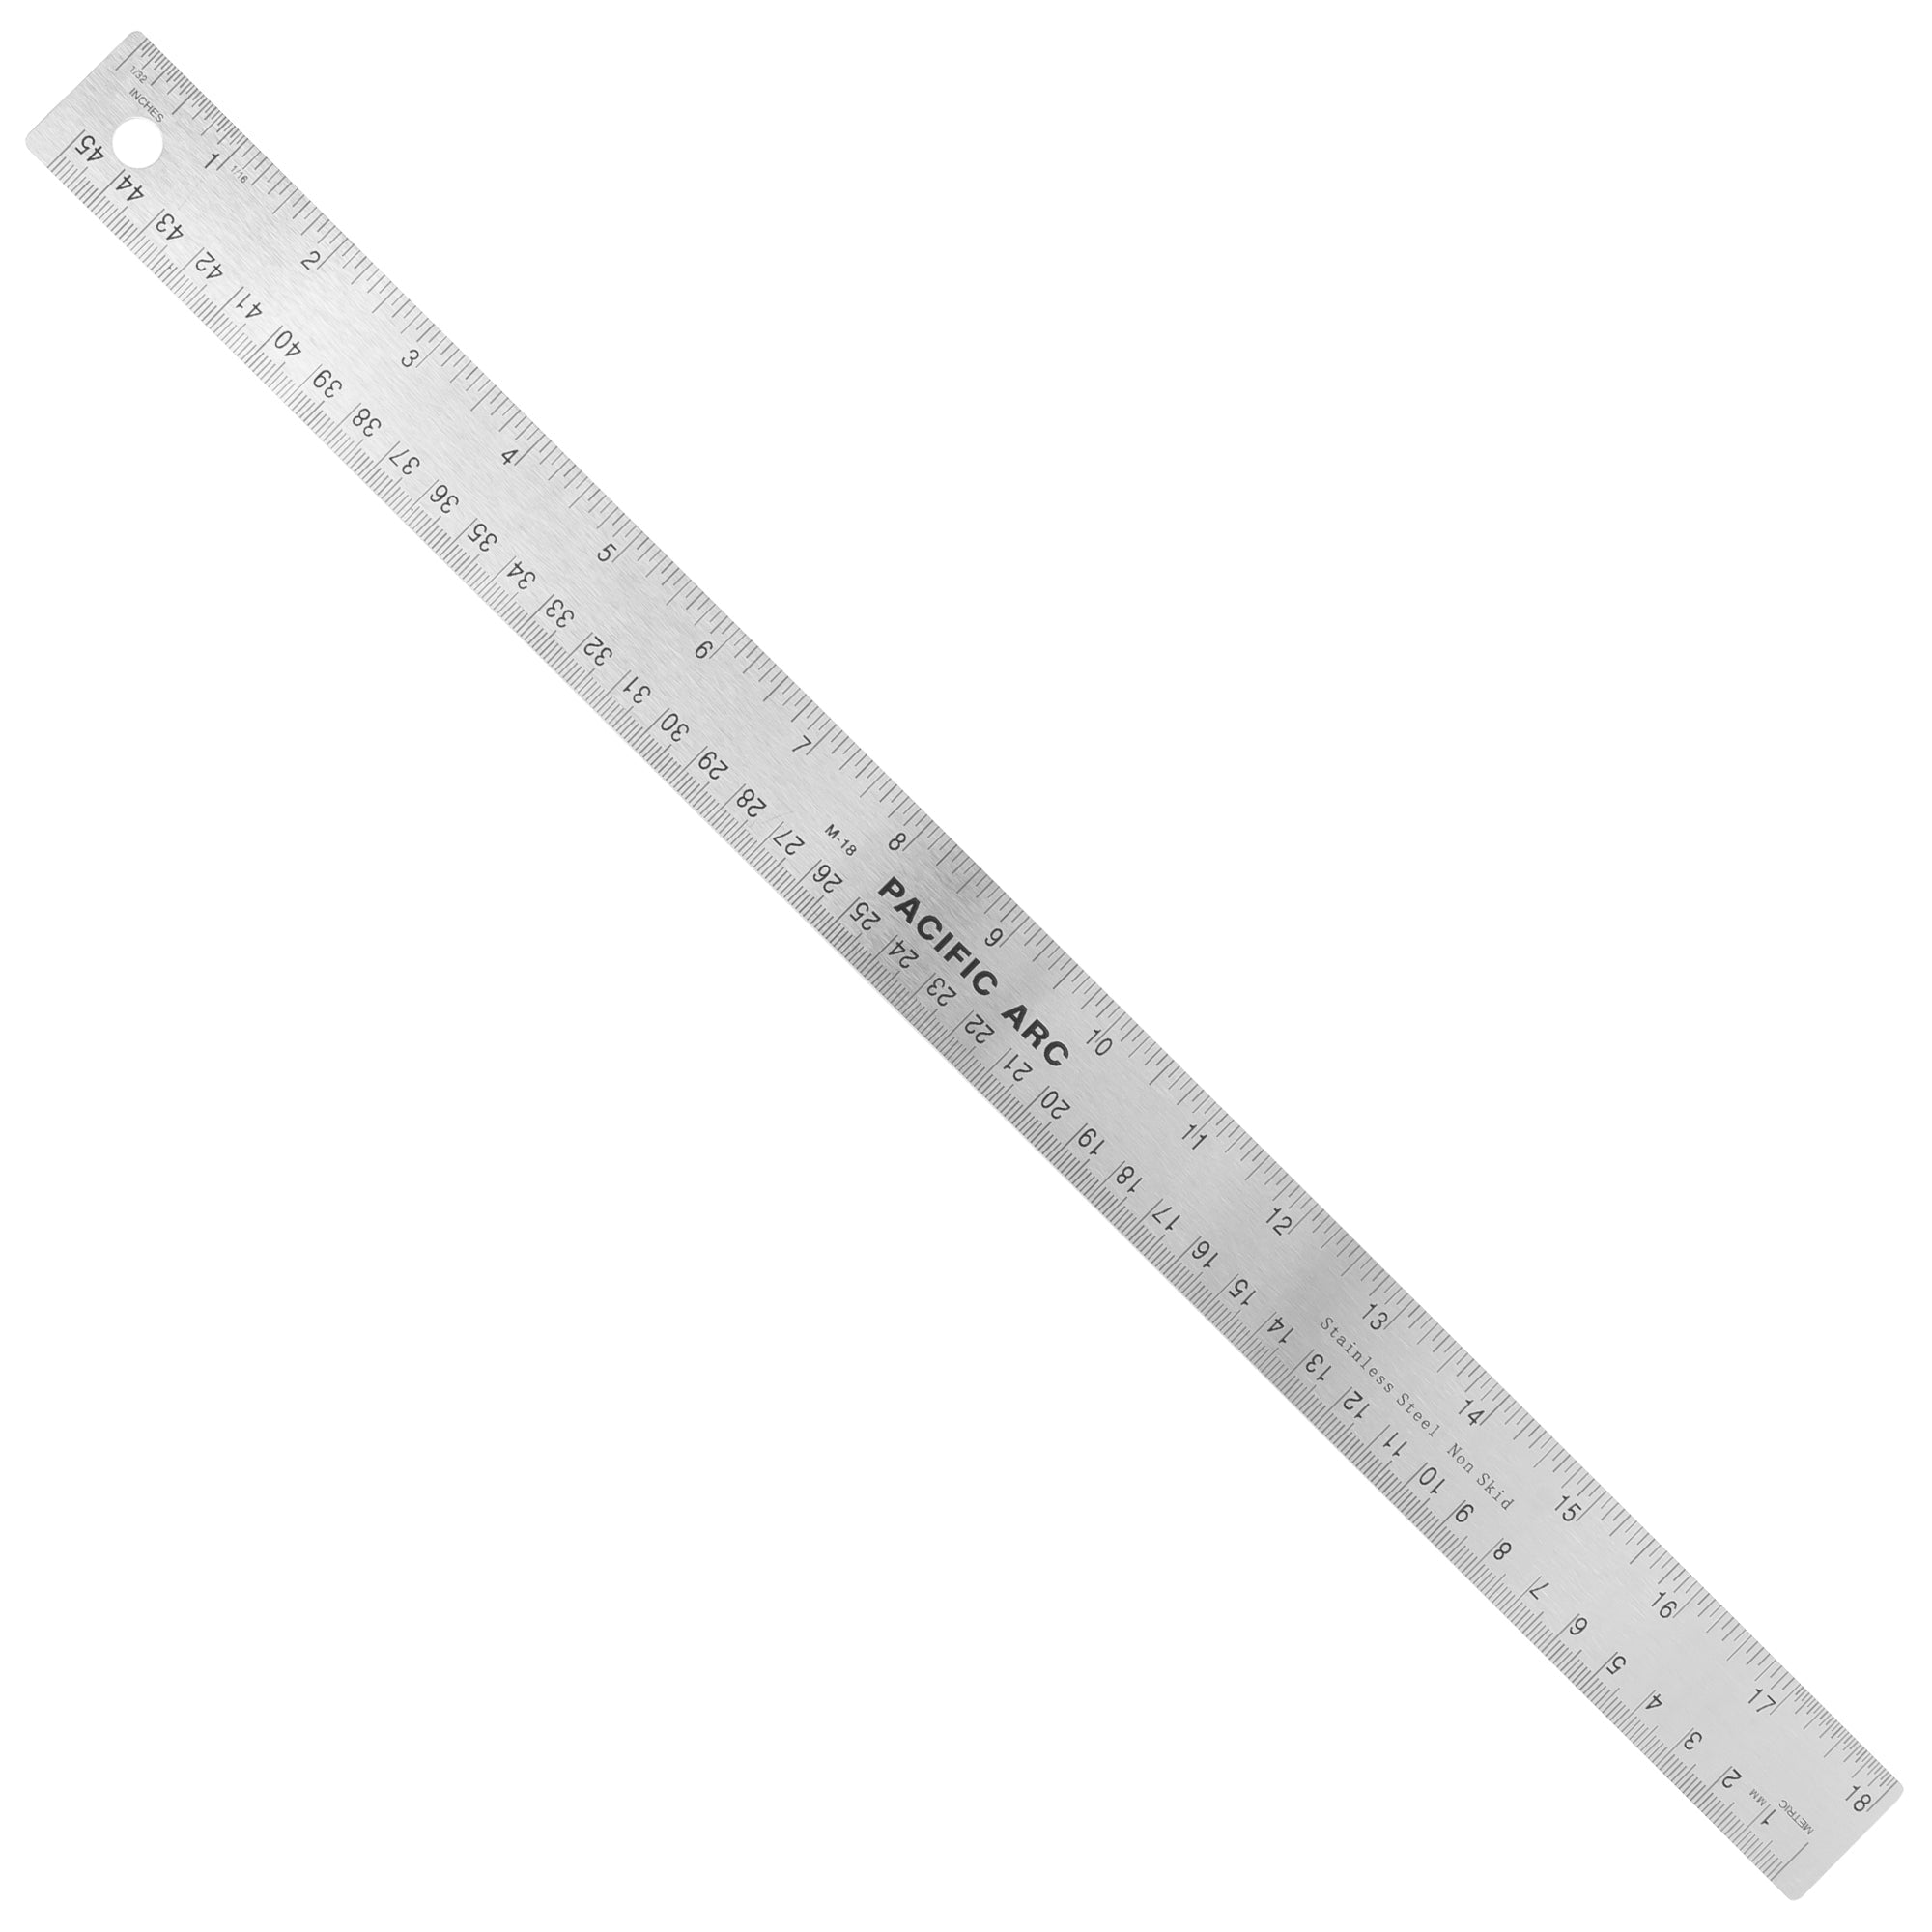 Stainless Steel Ruler (Pacific Arc)